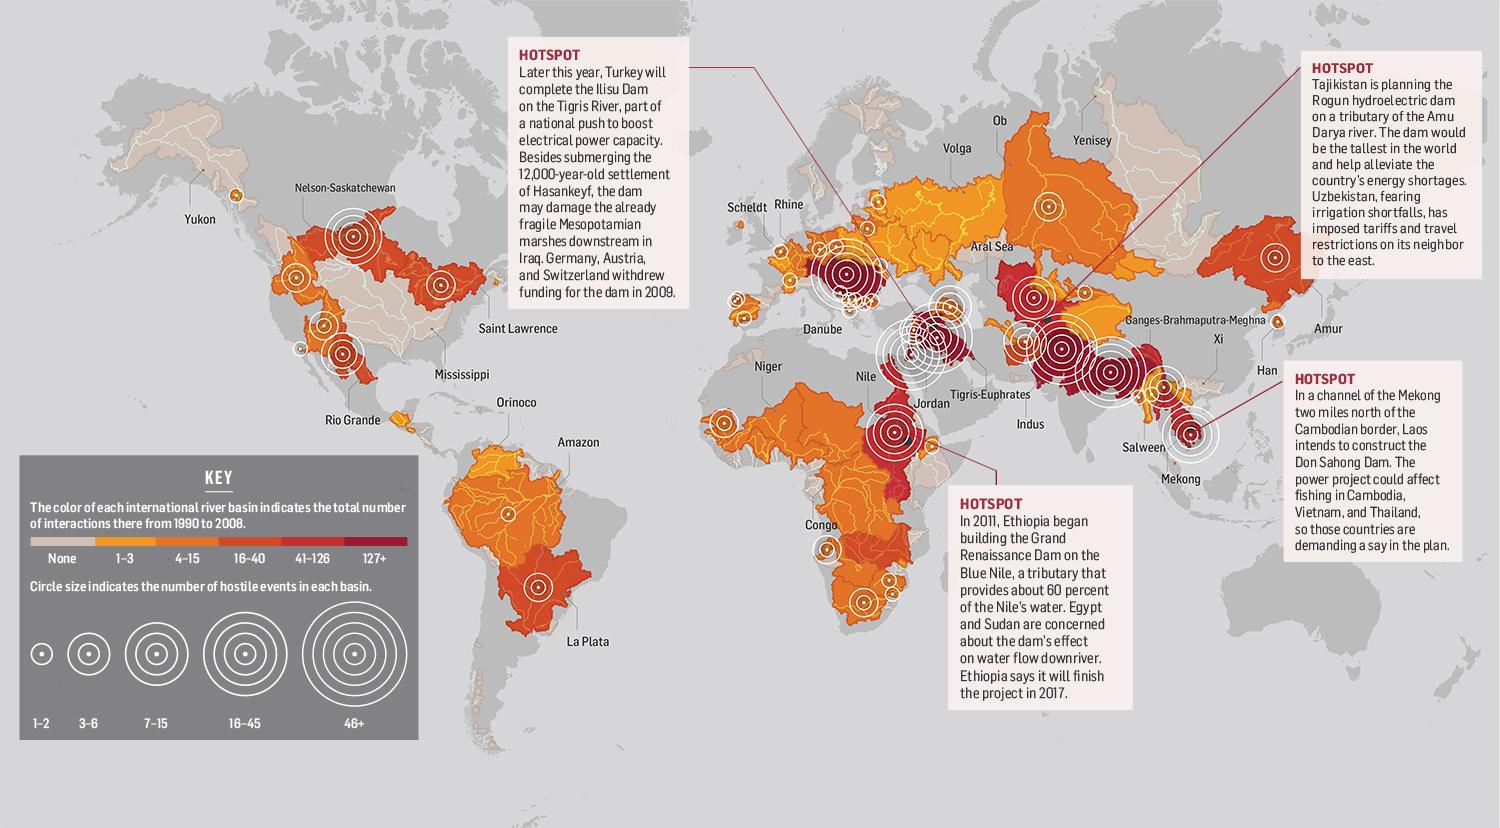 Hot spots of water conflict http://www.popsci.com/article/science/where-will-worlds-water-conflicts-erupt-infographic?dom=PSC